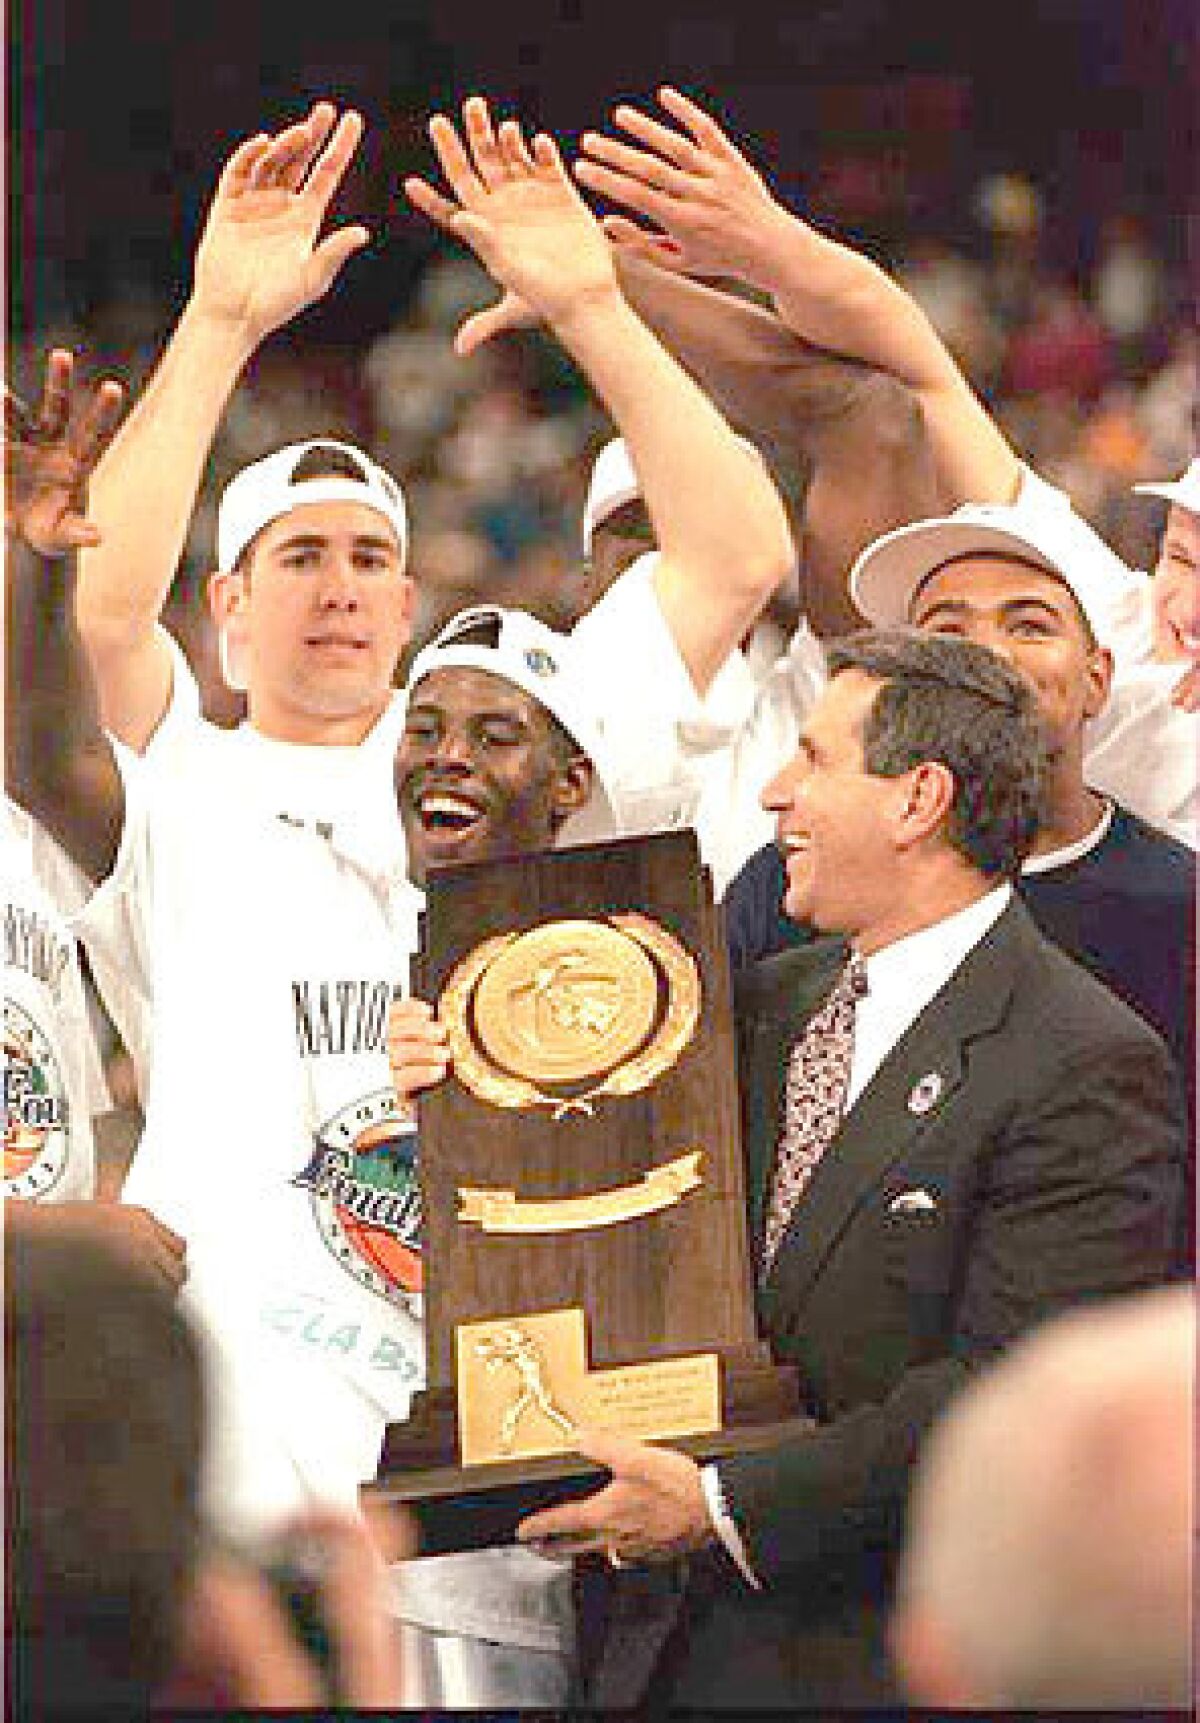 Jim Harrick enjoyed his biggest victory on April 3, 1995 when UCLA won the National Championship at the Kingdome in Seattle.